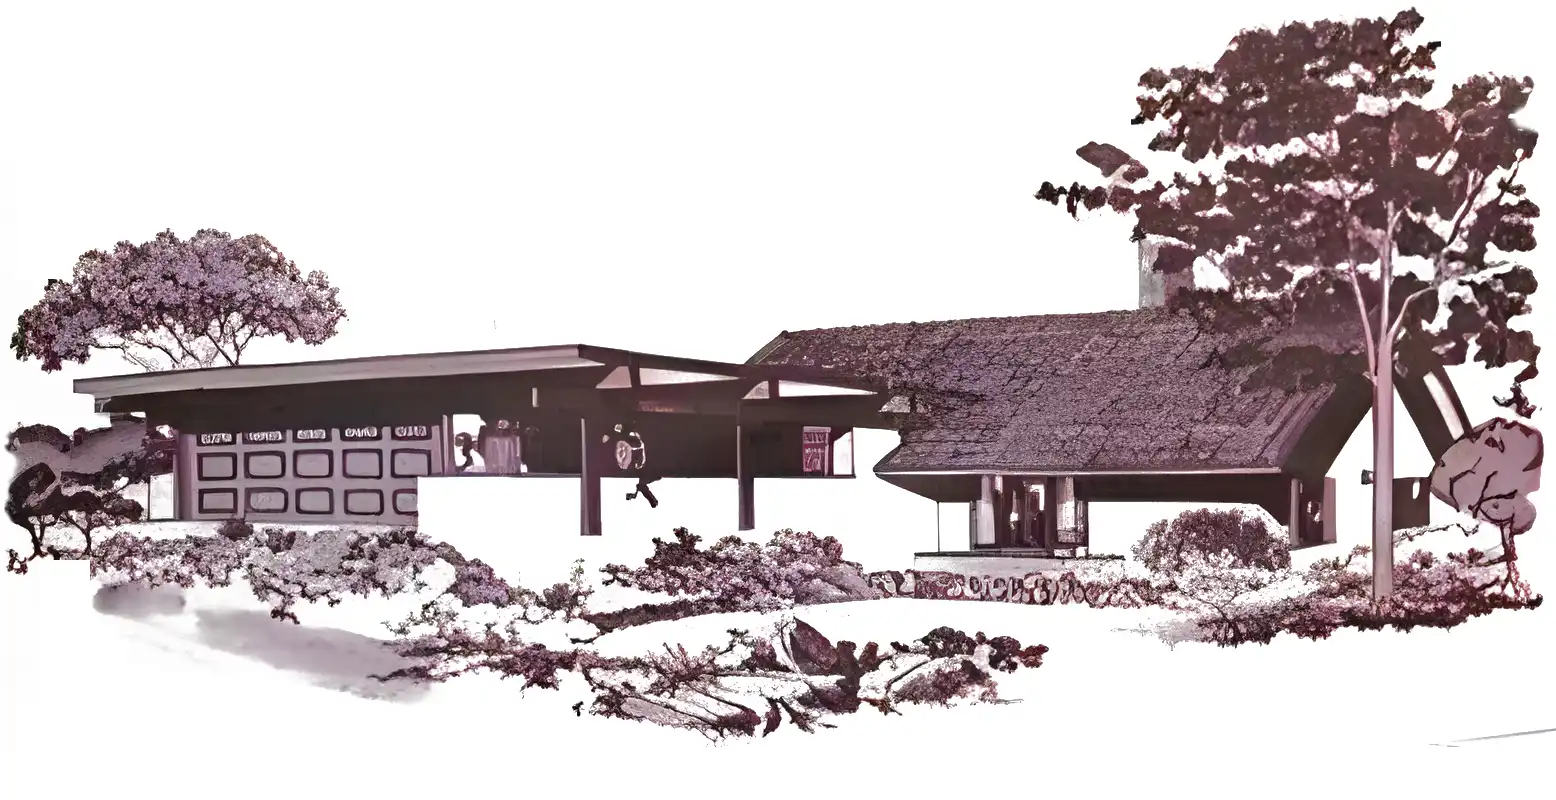 Monochrome rendering of 1960s split level ranch style house, variant combining gable roof with flat roofed garage.